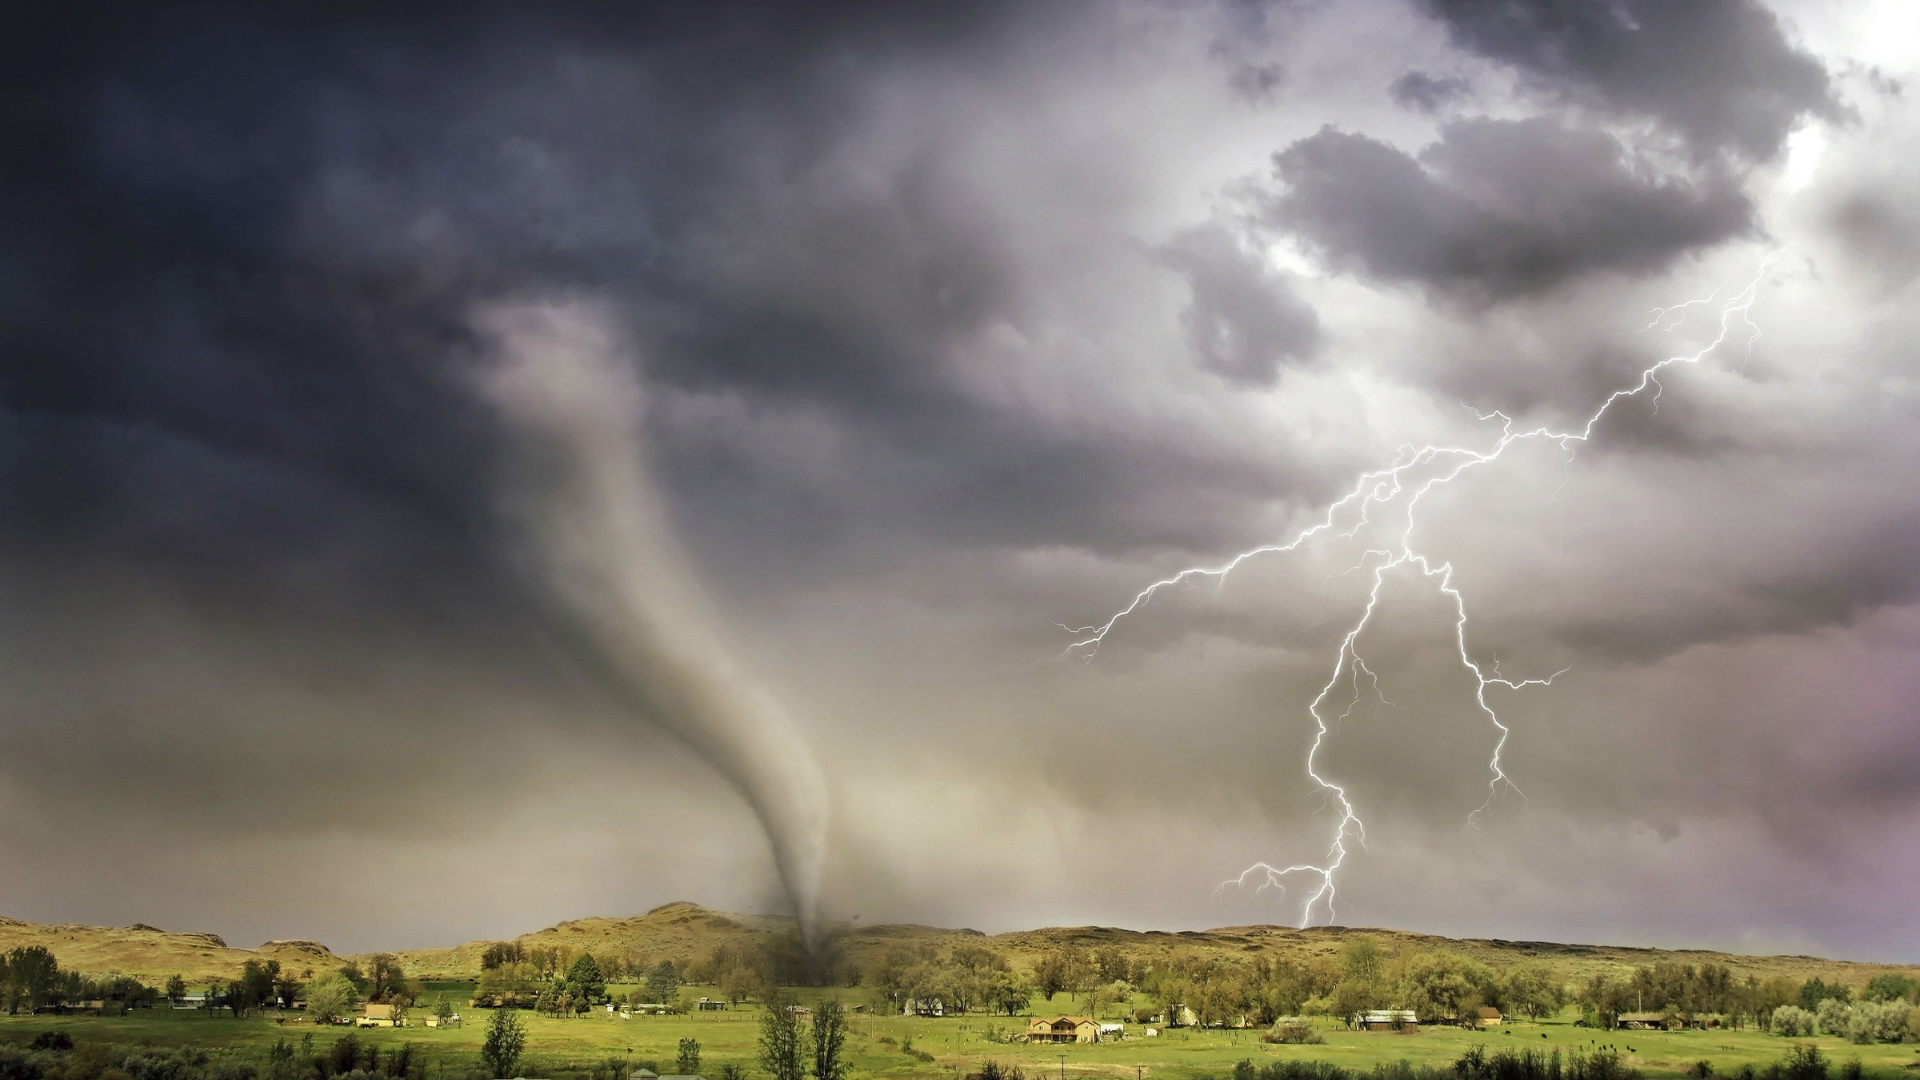 Image of a storm with a tornado hitting a valley